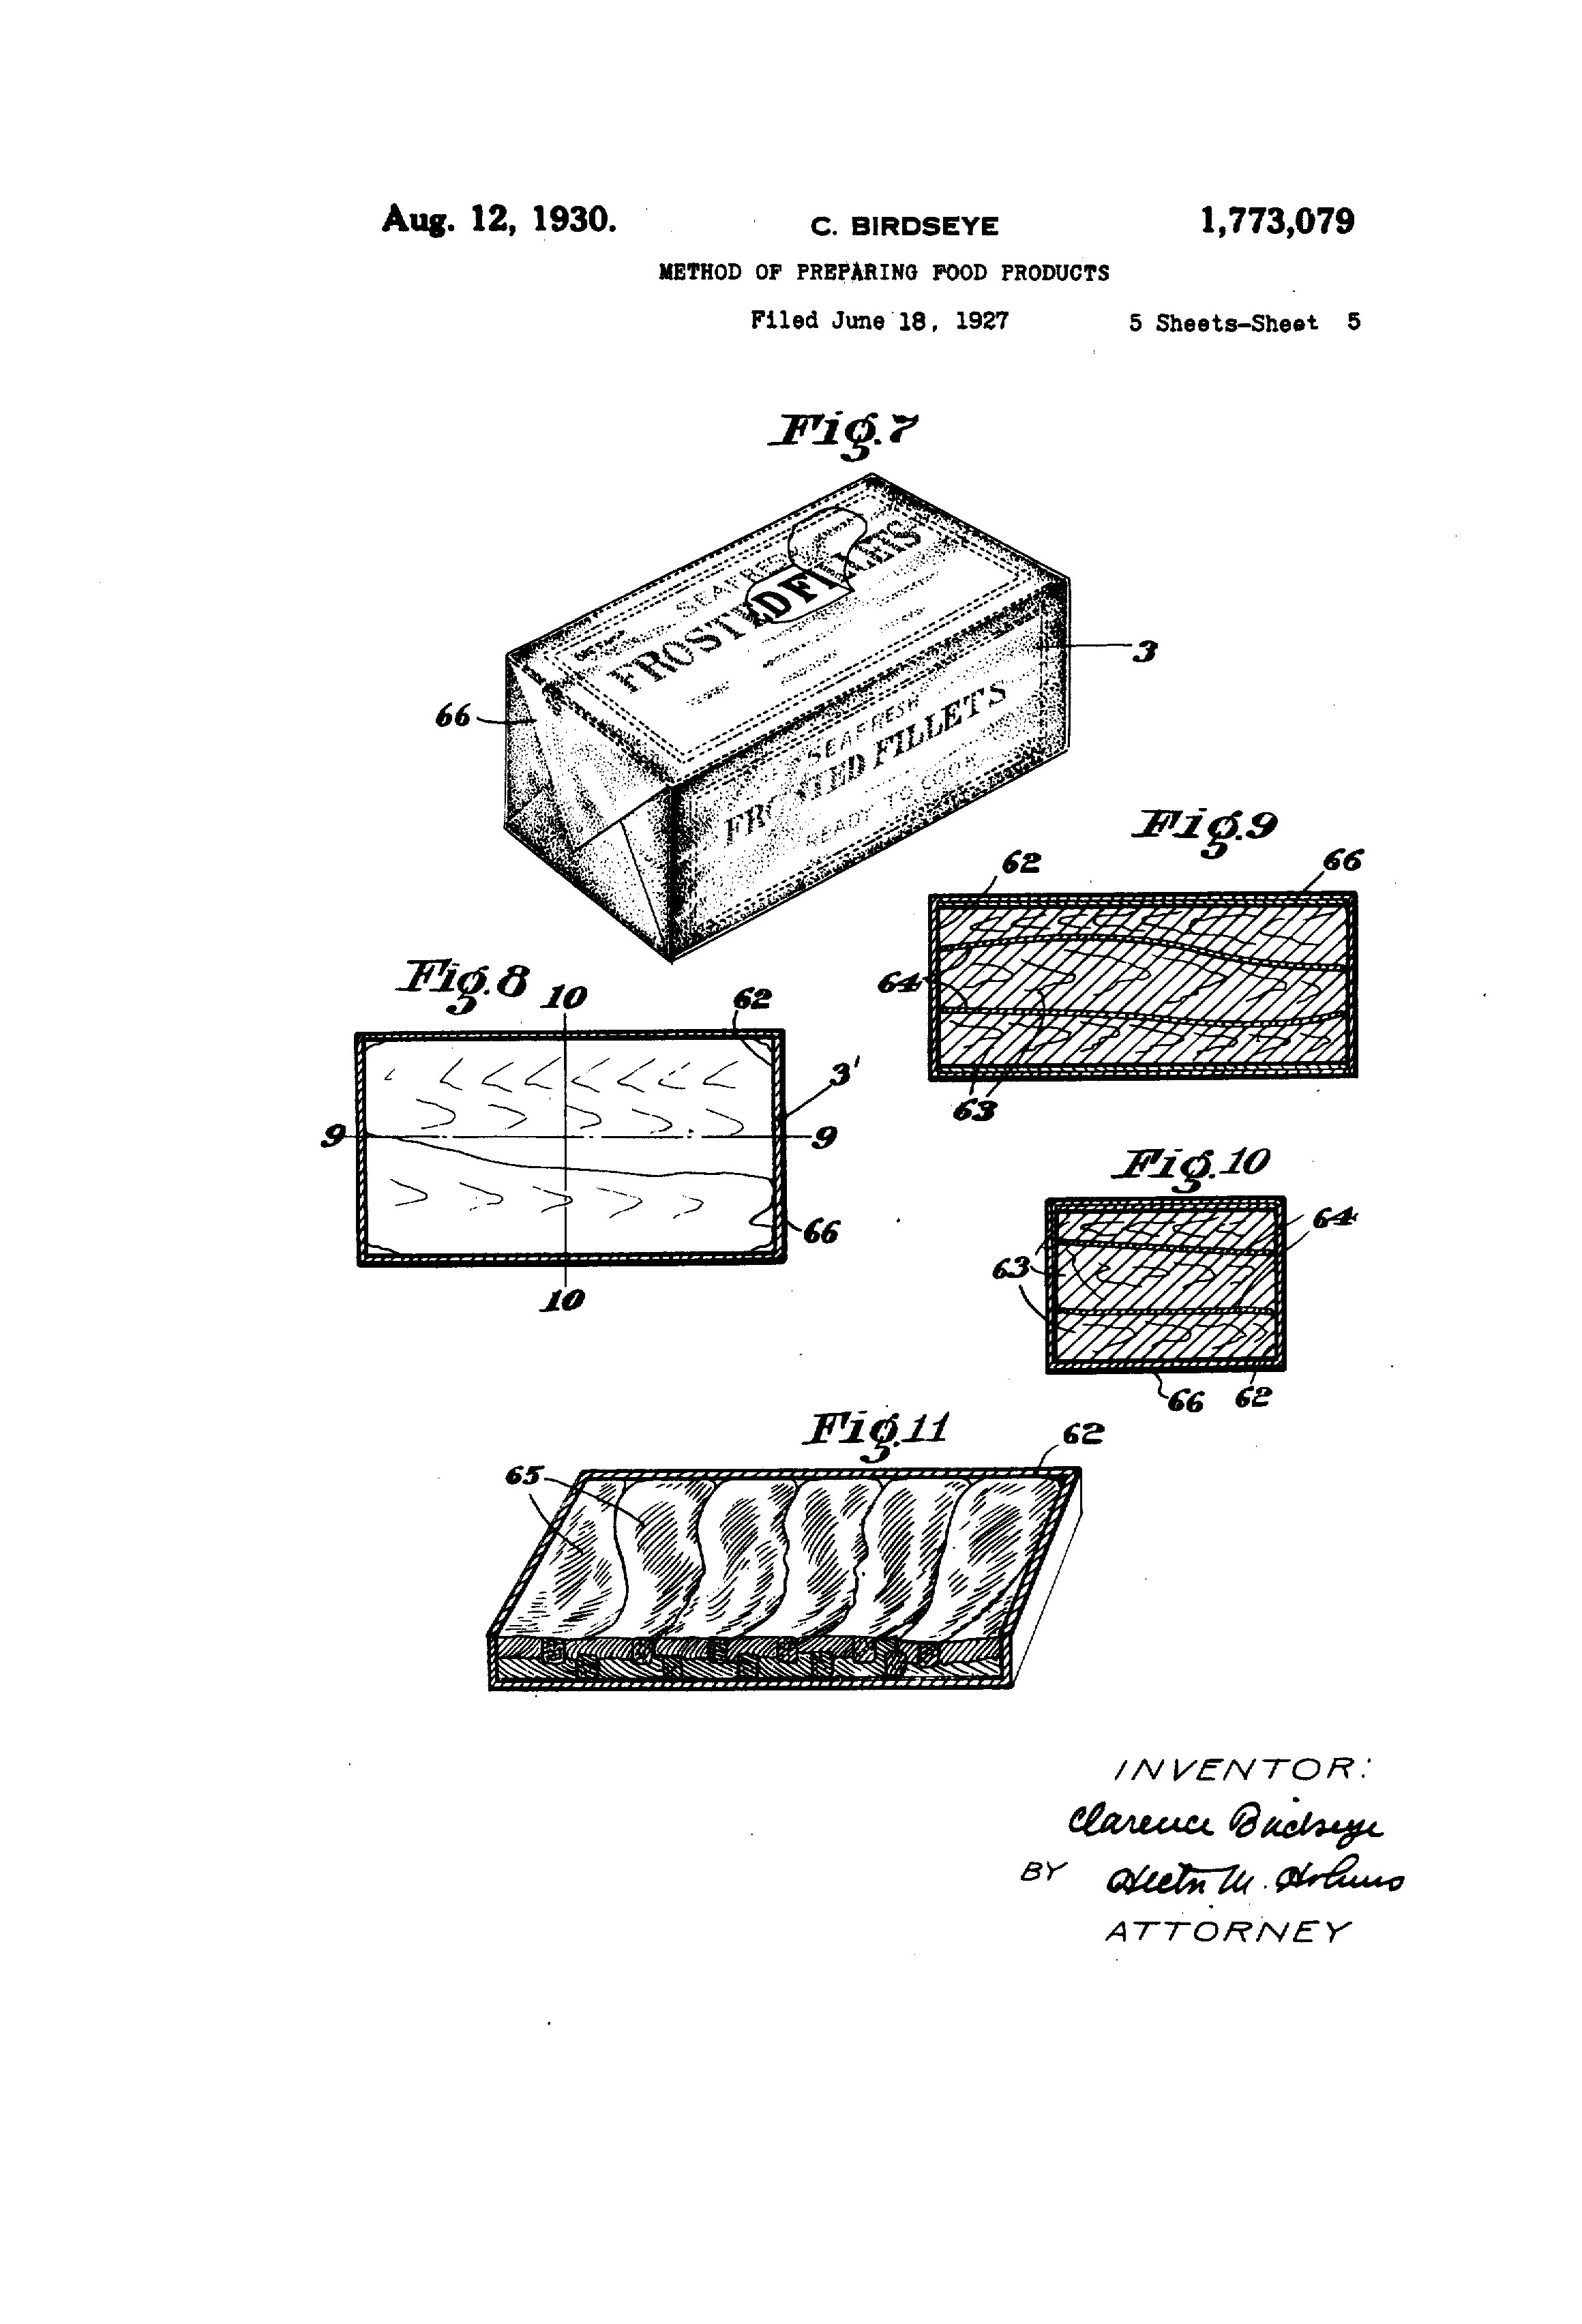 Clarence Birdseye's patent for freezing food